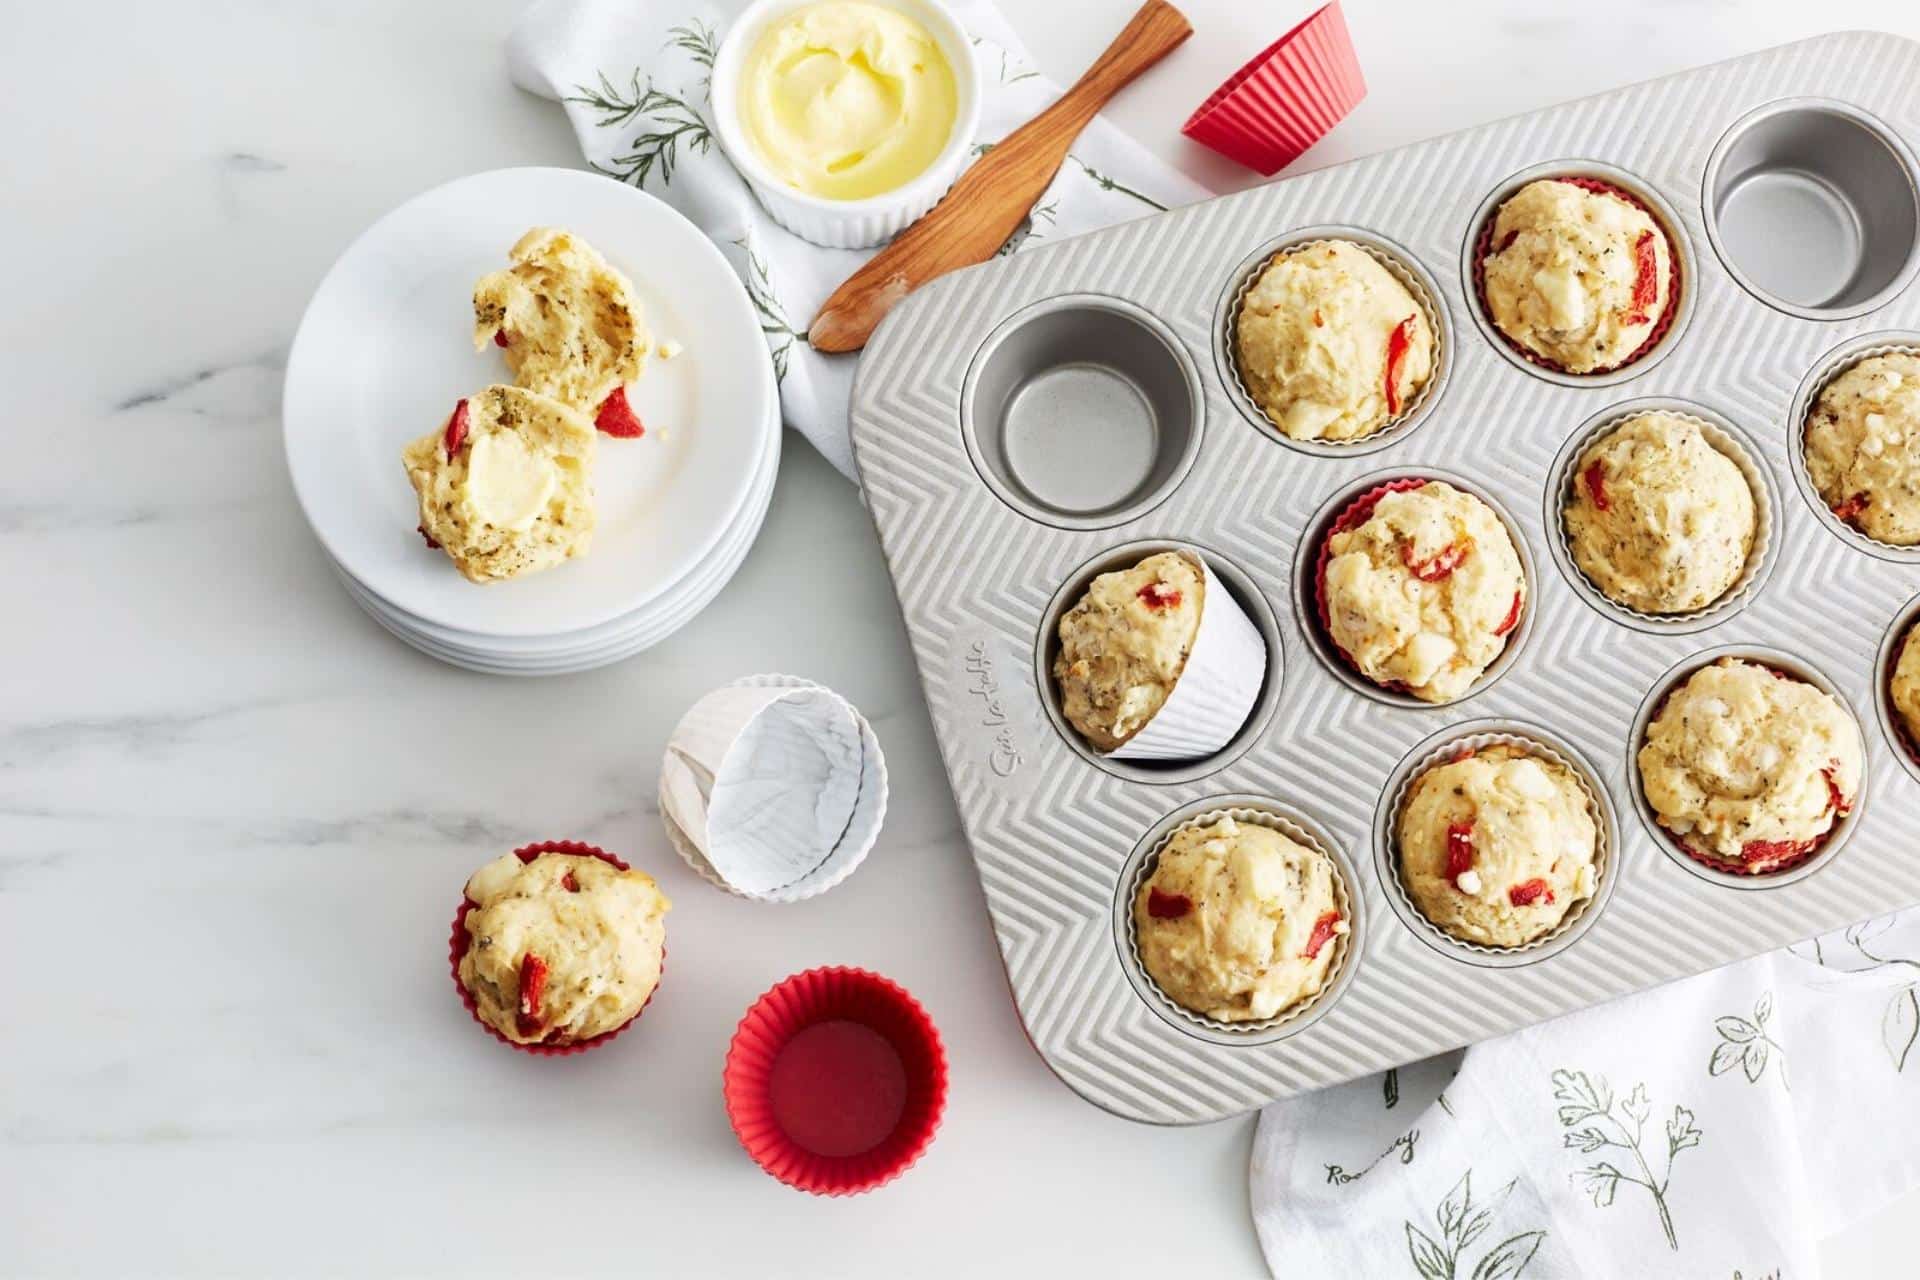 Everything You Need To Make Bakery Quality Muffins at Home